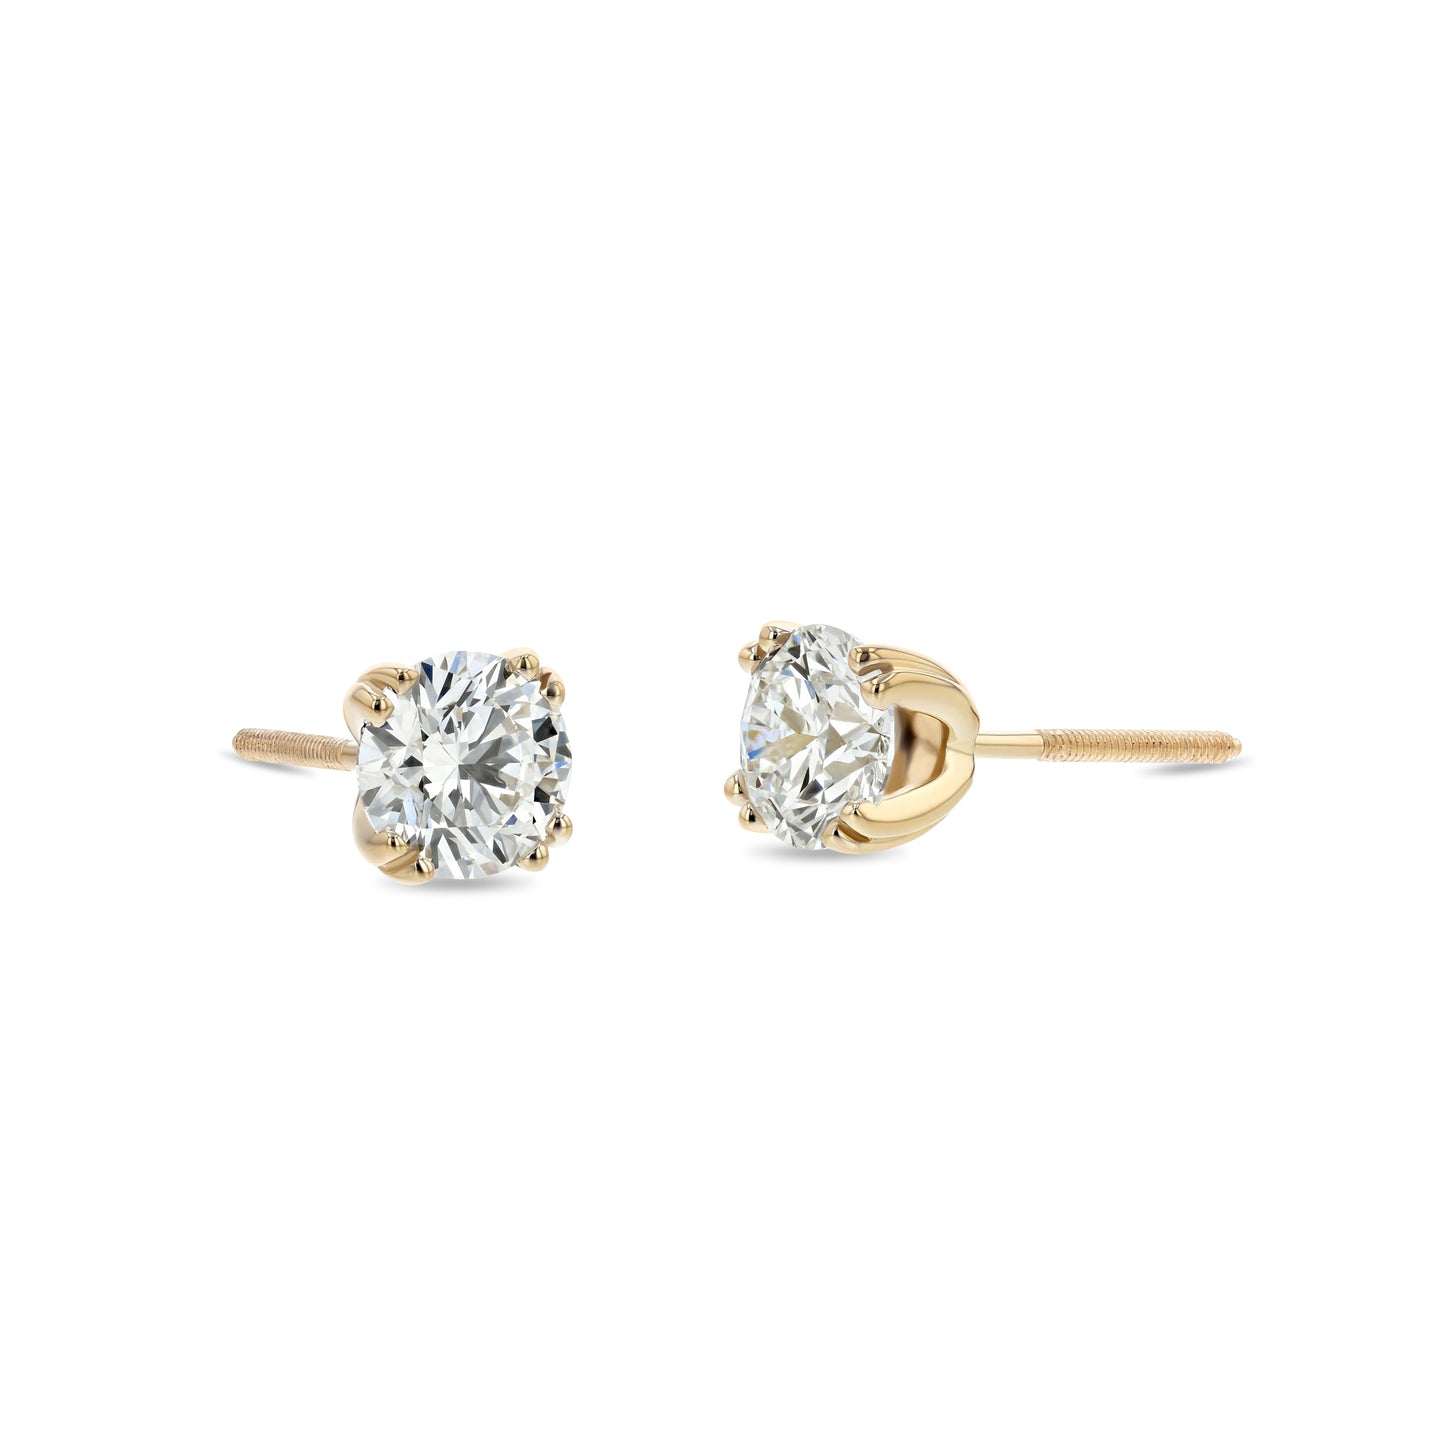 14k Yellow Gold Double Prong Round Diamond Stud Earrings 1ctw (5.2mm Ea), H Color, Si3-i1 Clarity